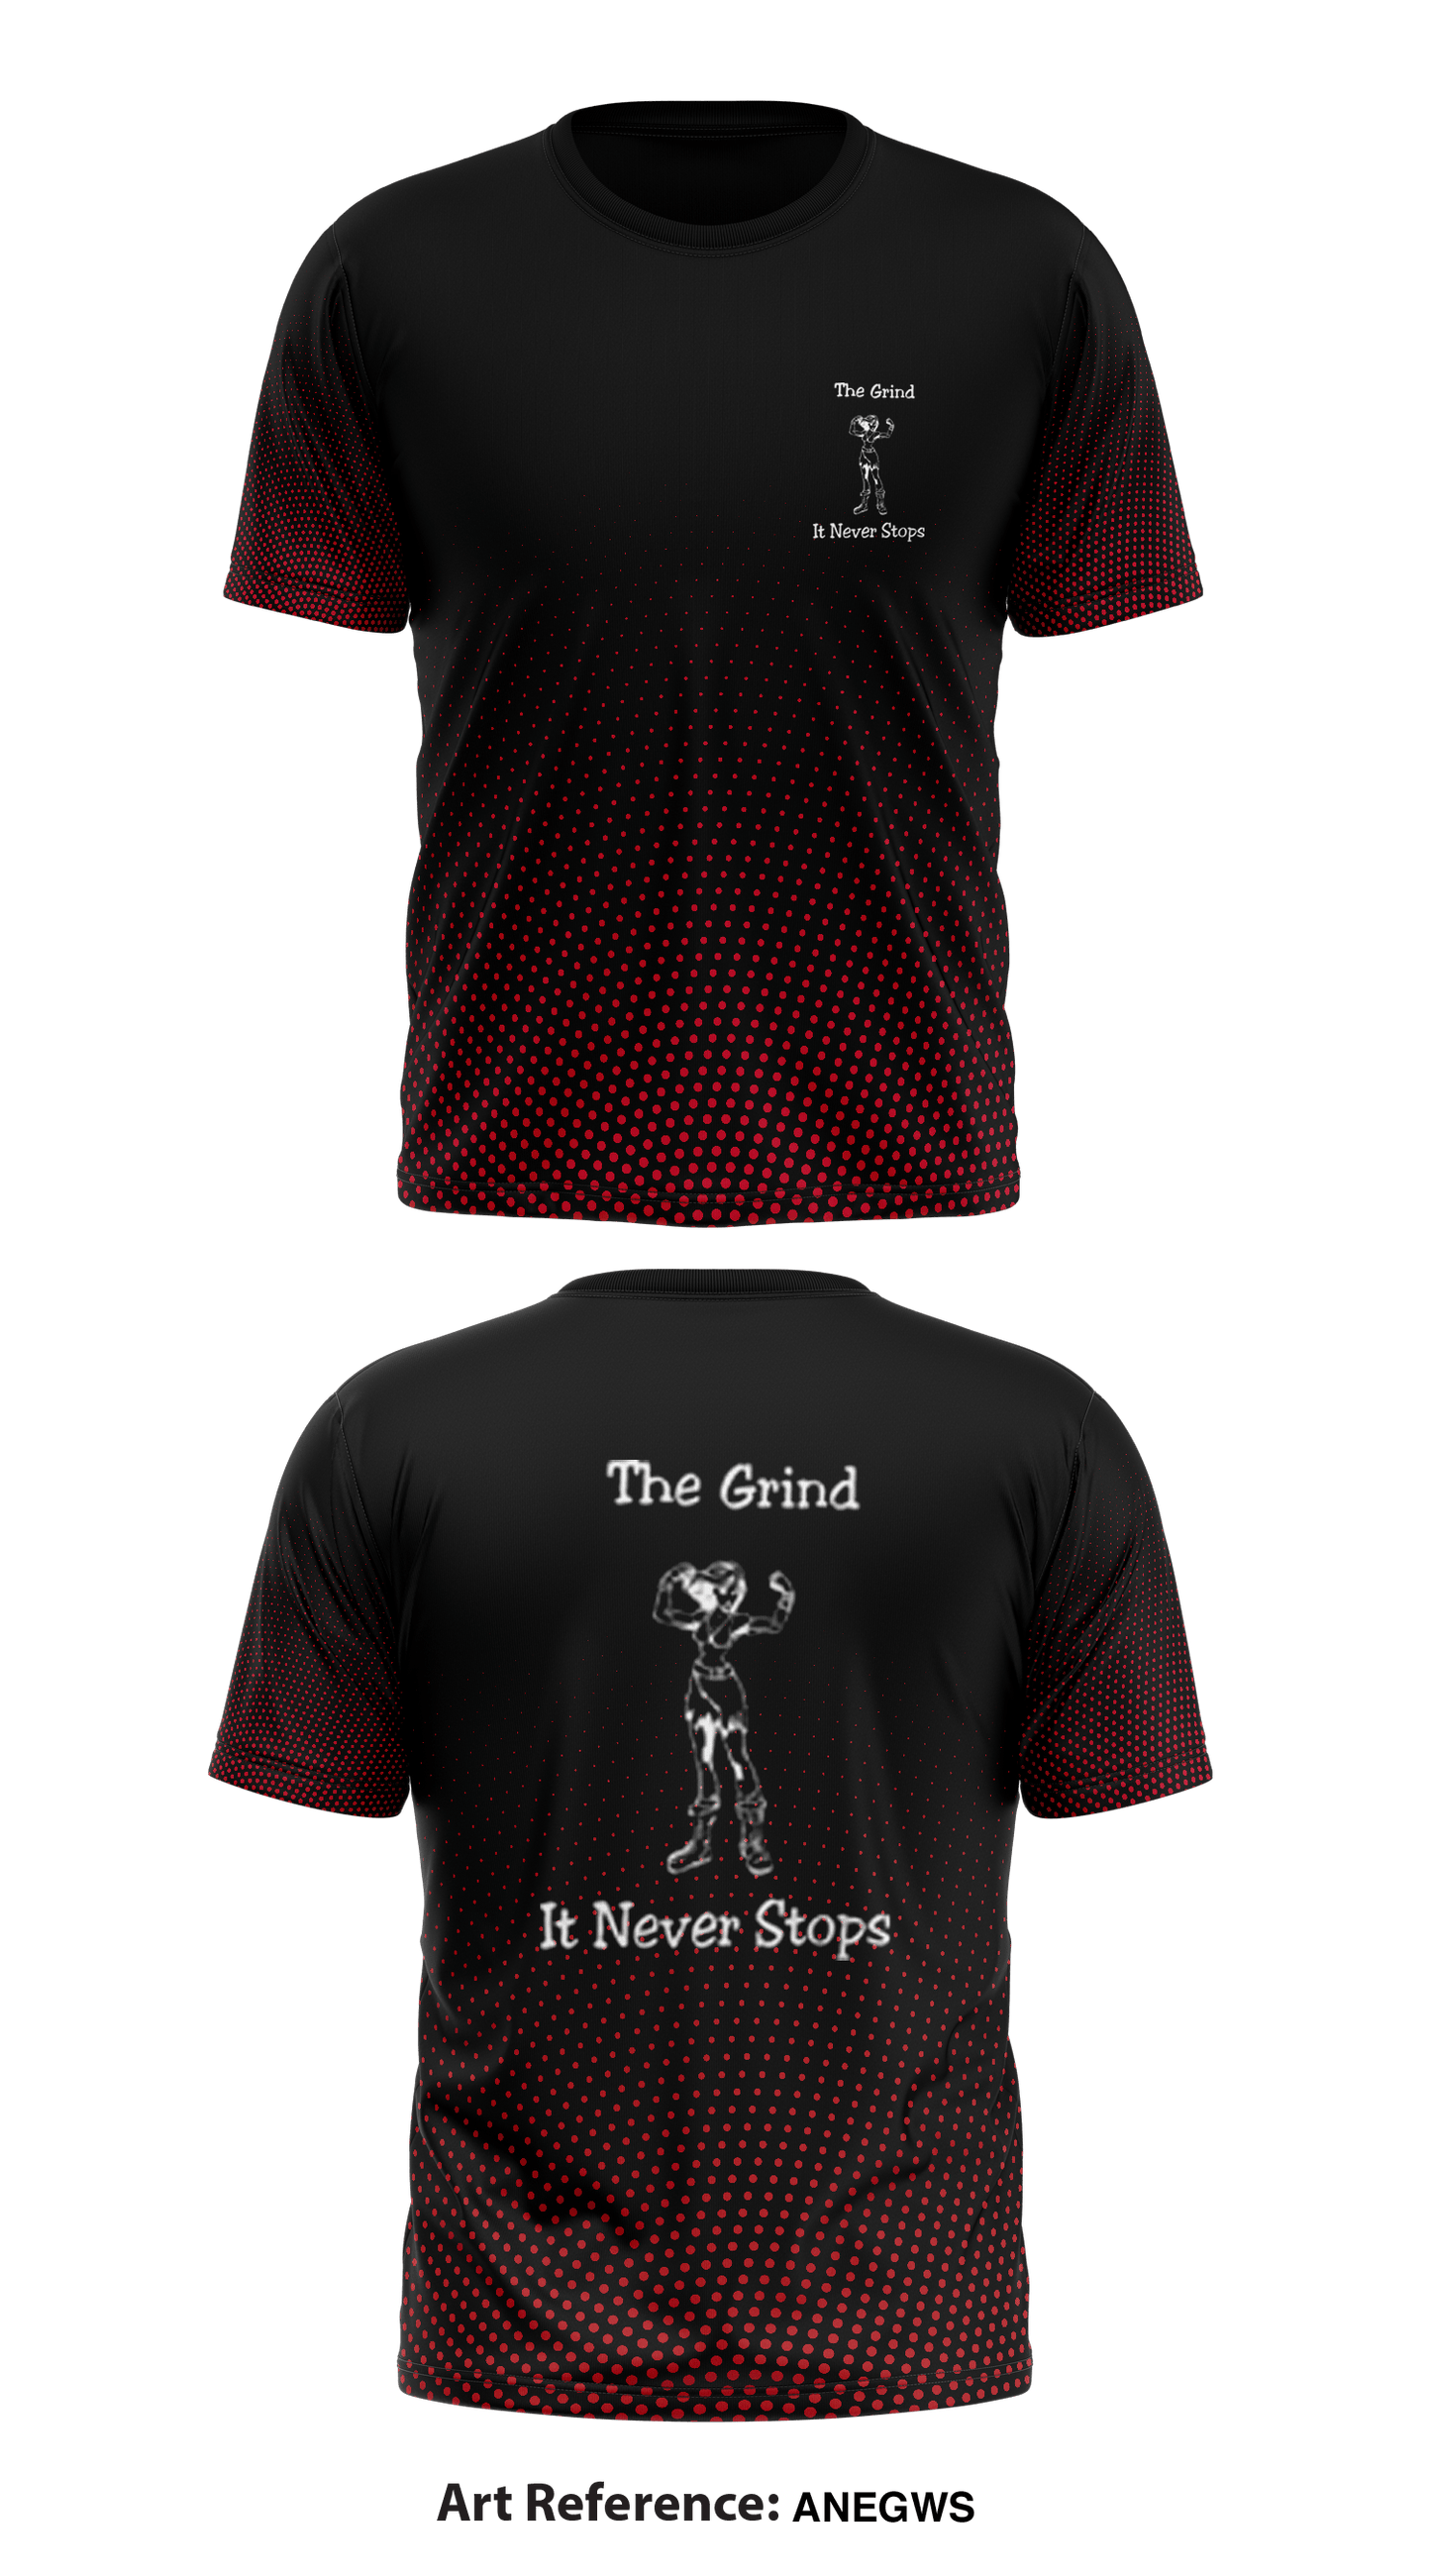 The Grind Core Men's SS Performance Tee - ANEGWs